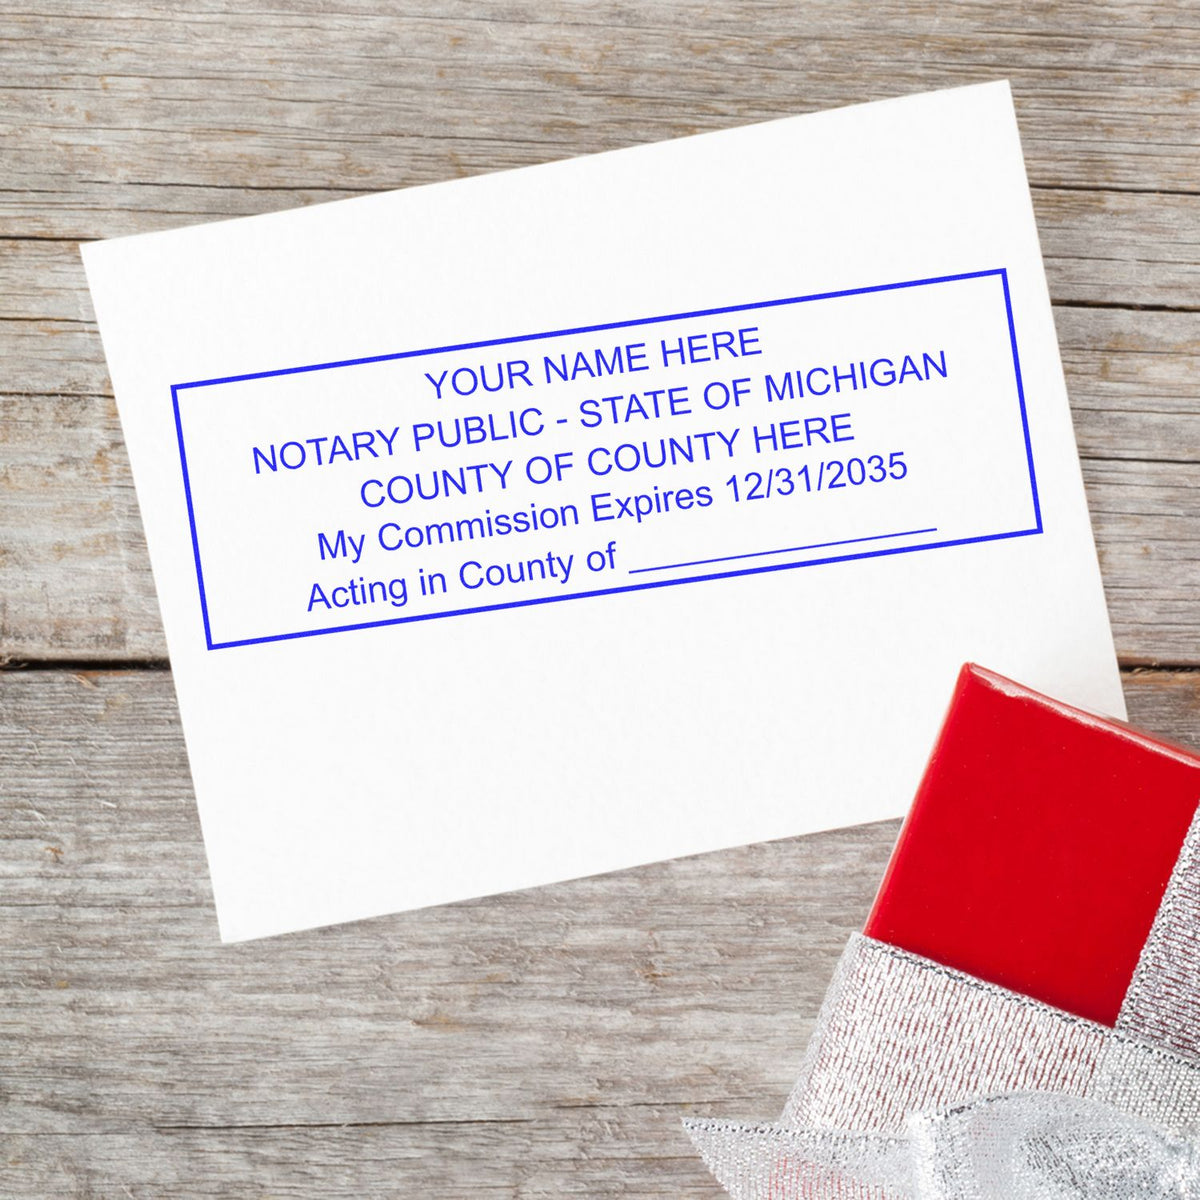 This paper is stamped with a sample imprint of the Slim Pre-Inked State Seal Notary Stamp for Michigan, signifying its quality and reliability.